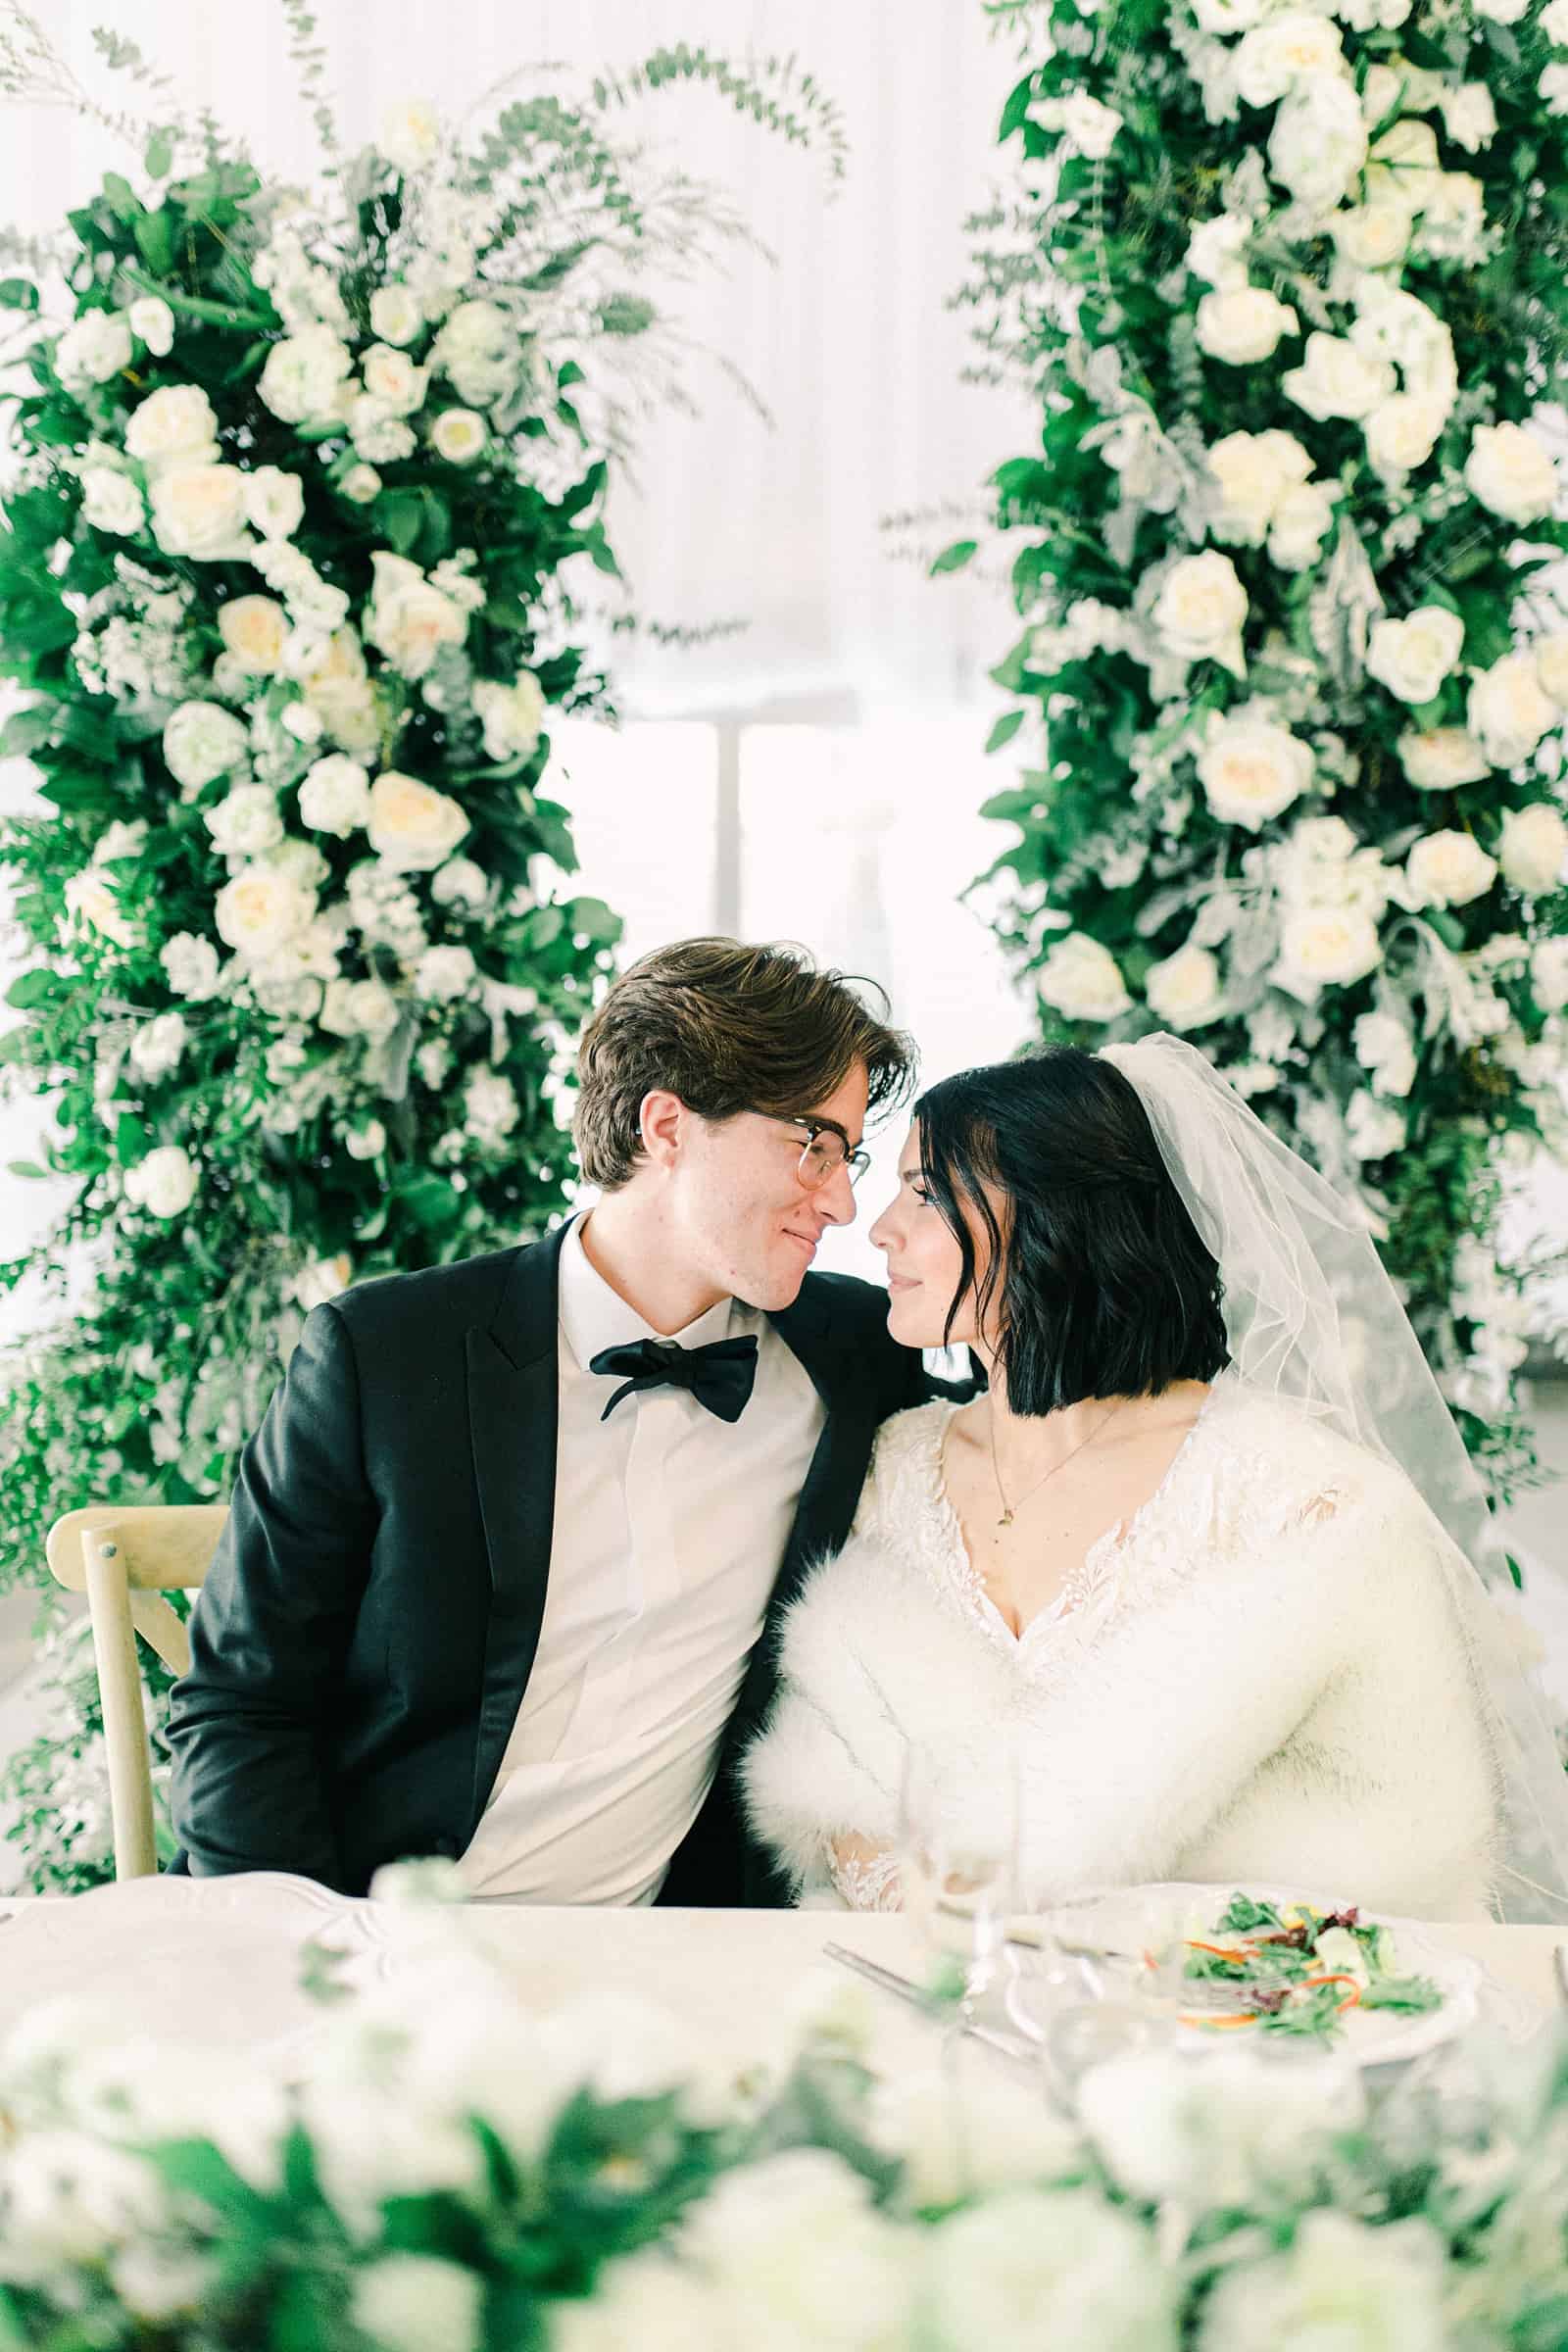 Luxury winter wedding at Willowbridge Estate in Boise, Idaho, bride and groom at sweetheart table with floral arch with white flowers and greenery backdrop